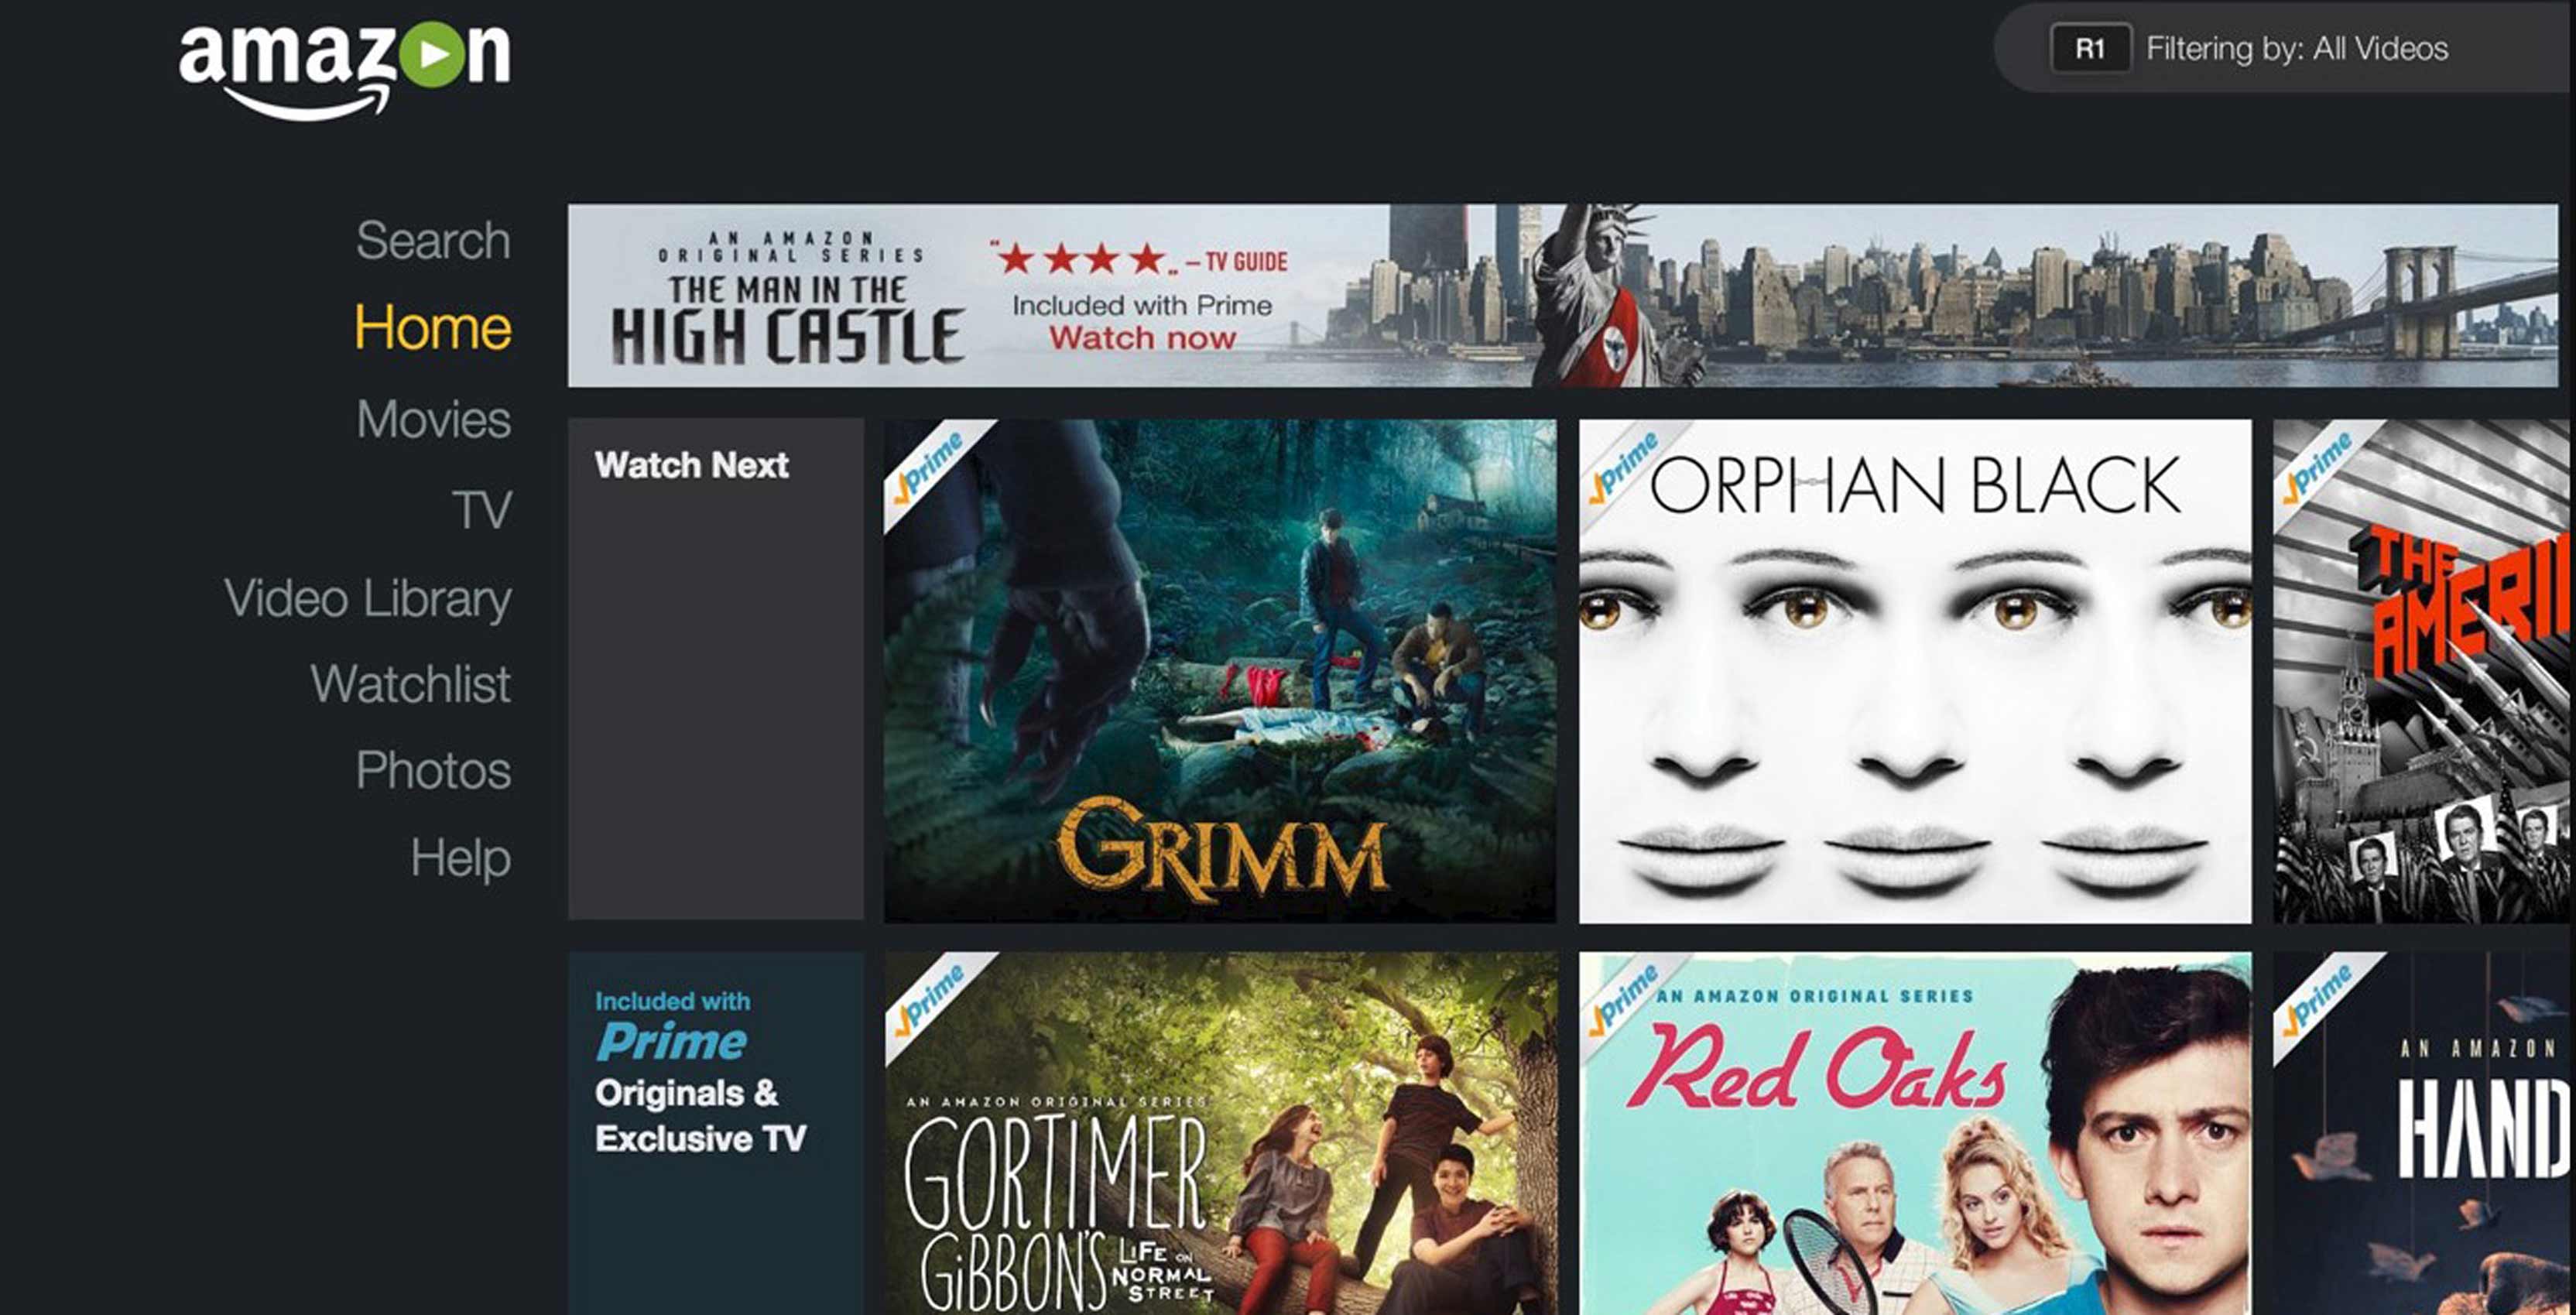 prime video on playstation 4